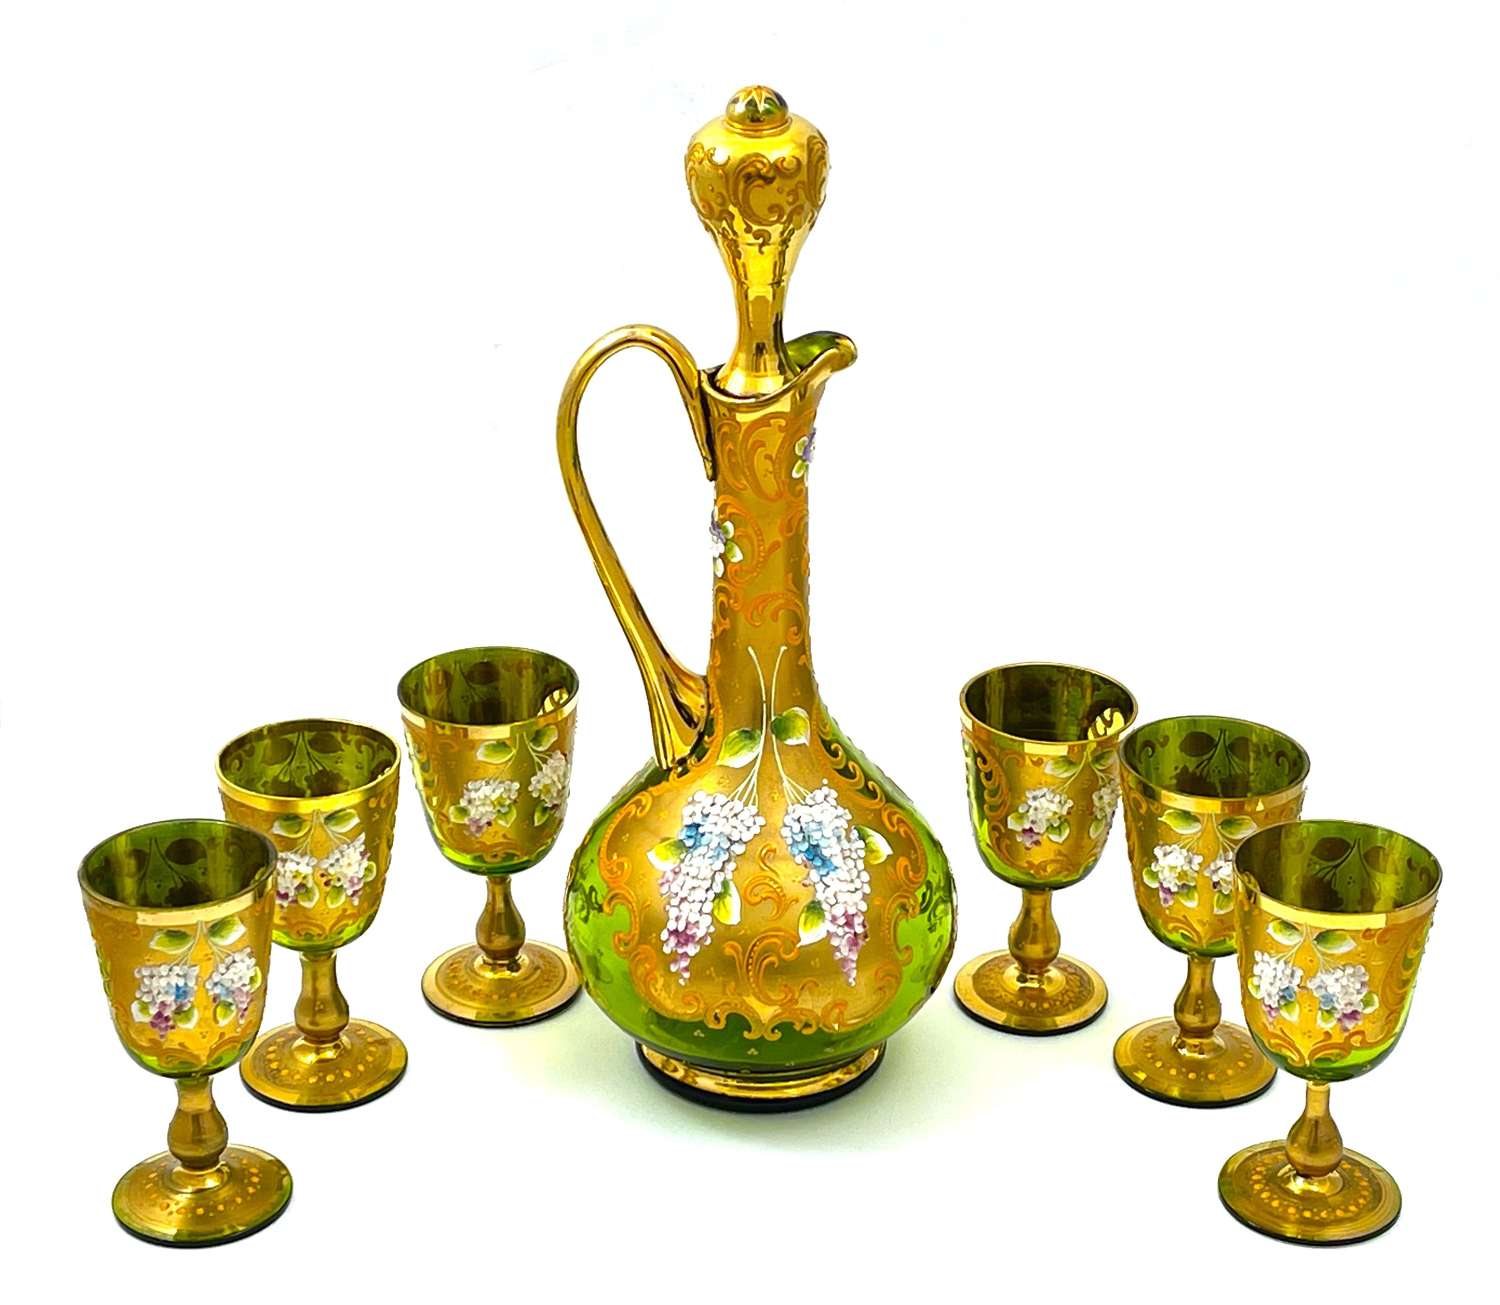 Beautiful Antique MOSER Glass Decanter Set Comprising of Decanter and 